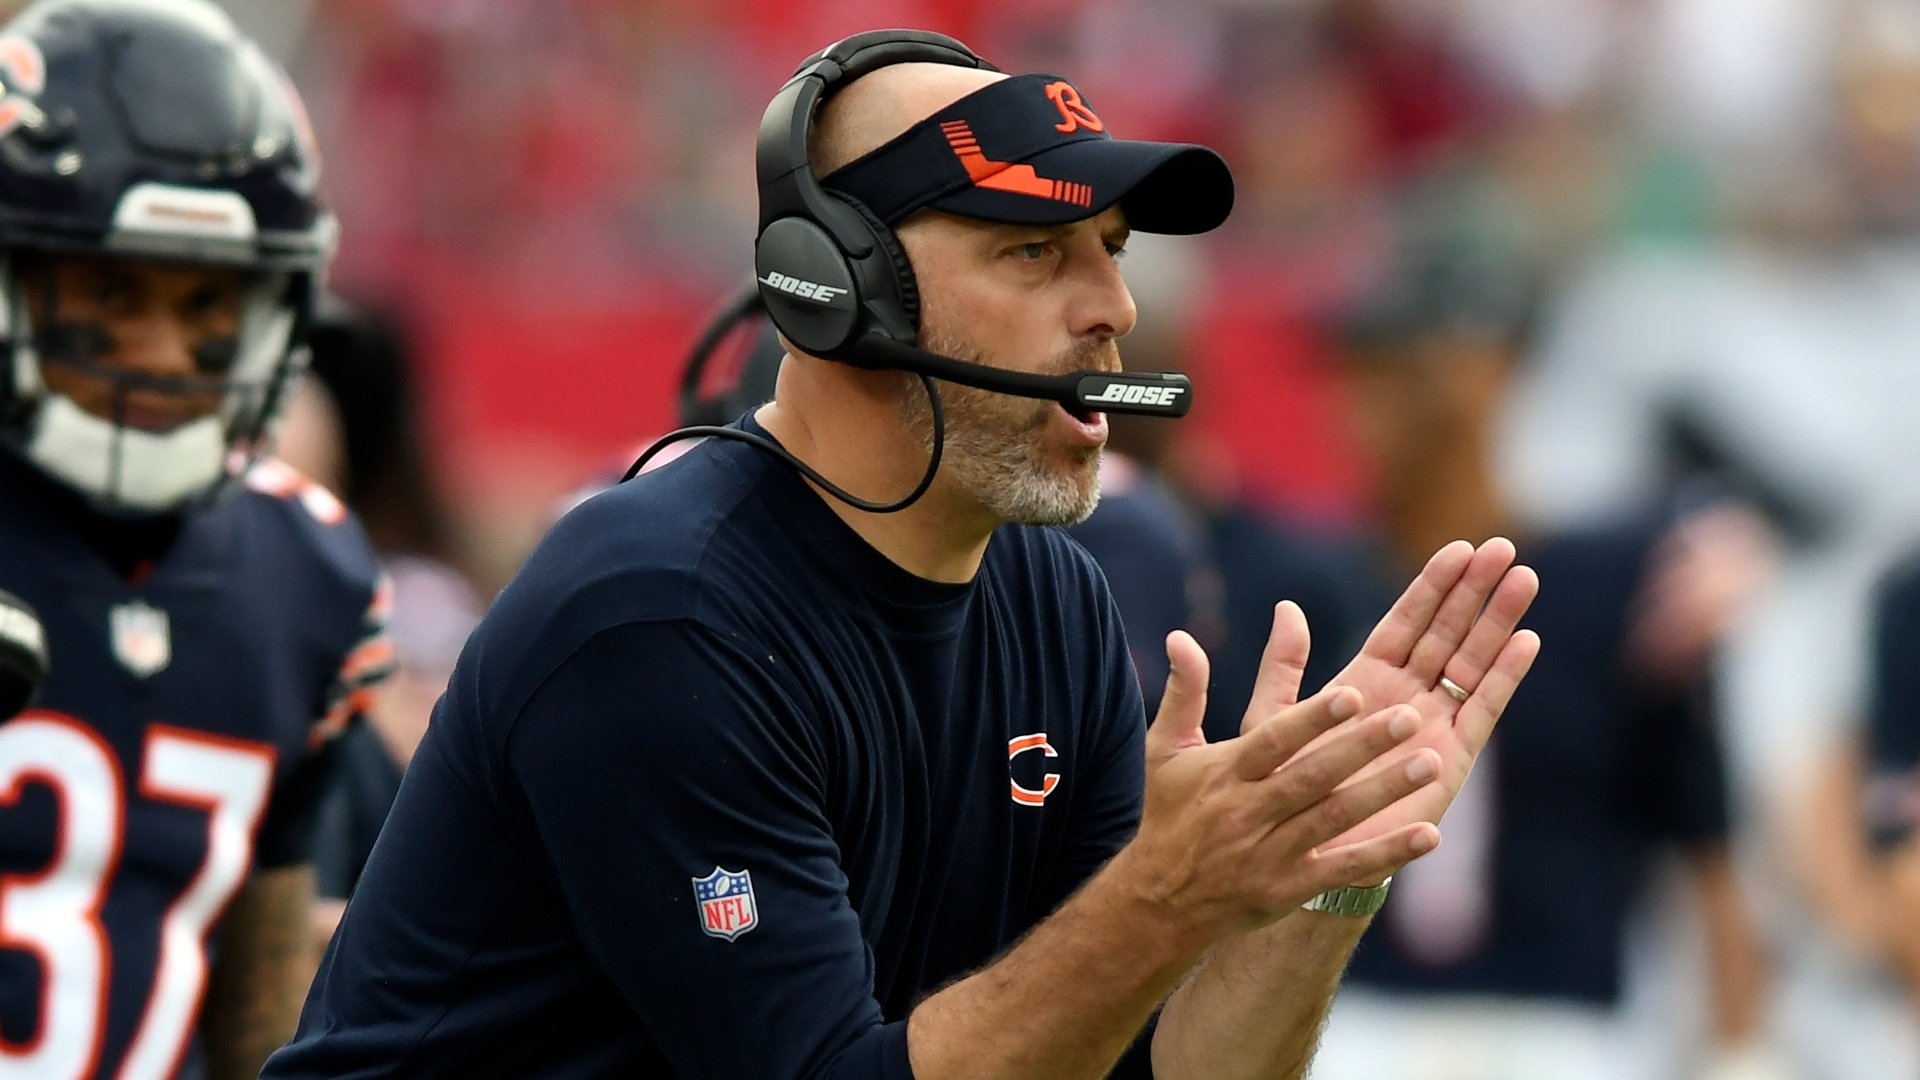 Bears Opt to Make Sweeping Changes, Fire GM Pace, Coach Nagy, Chicago News